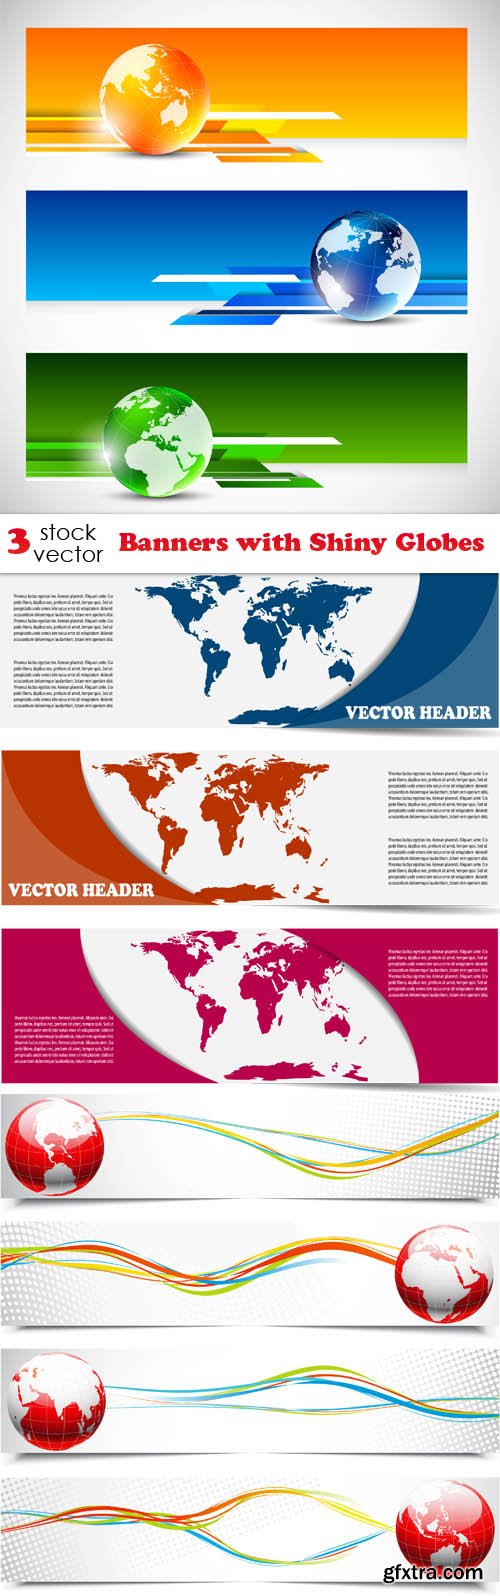 Vectors - Banners with Shiny Globes